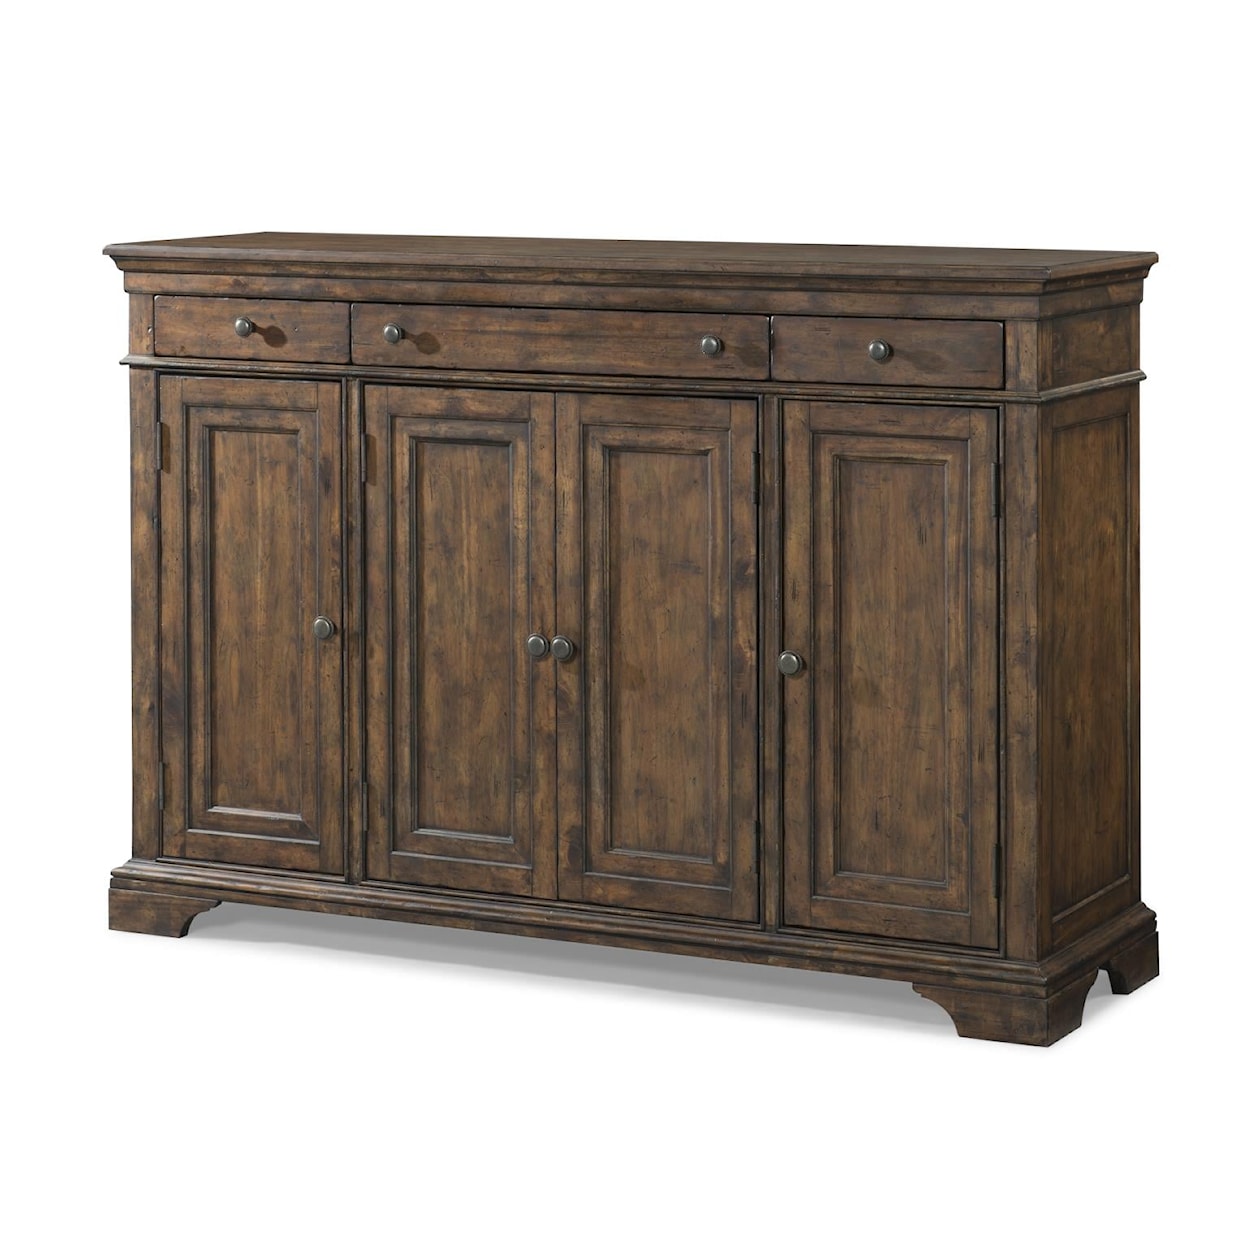 Trisha Yearwood Home Collection by Legacy Classic Trisha Yearwood Home Buffet